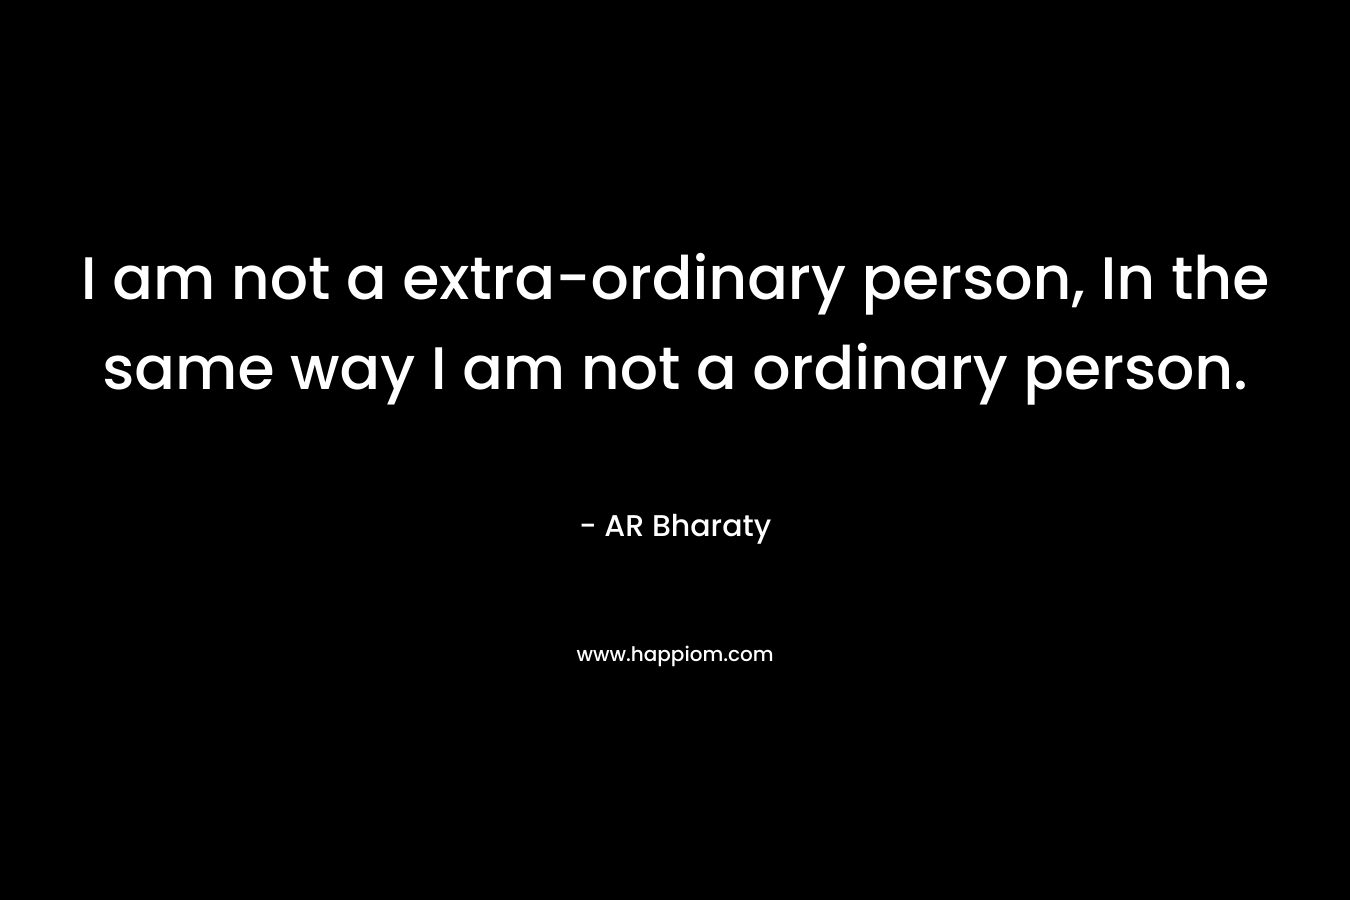 I am not a extra-ordinary person, In the same way I am not a ordinary person.